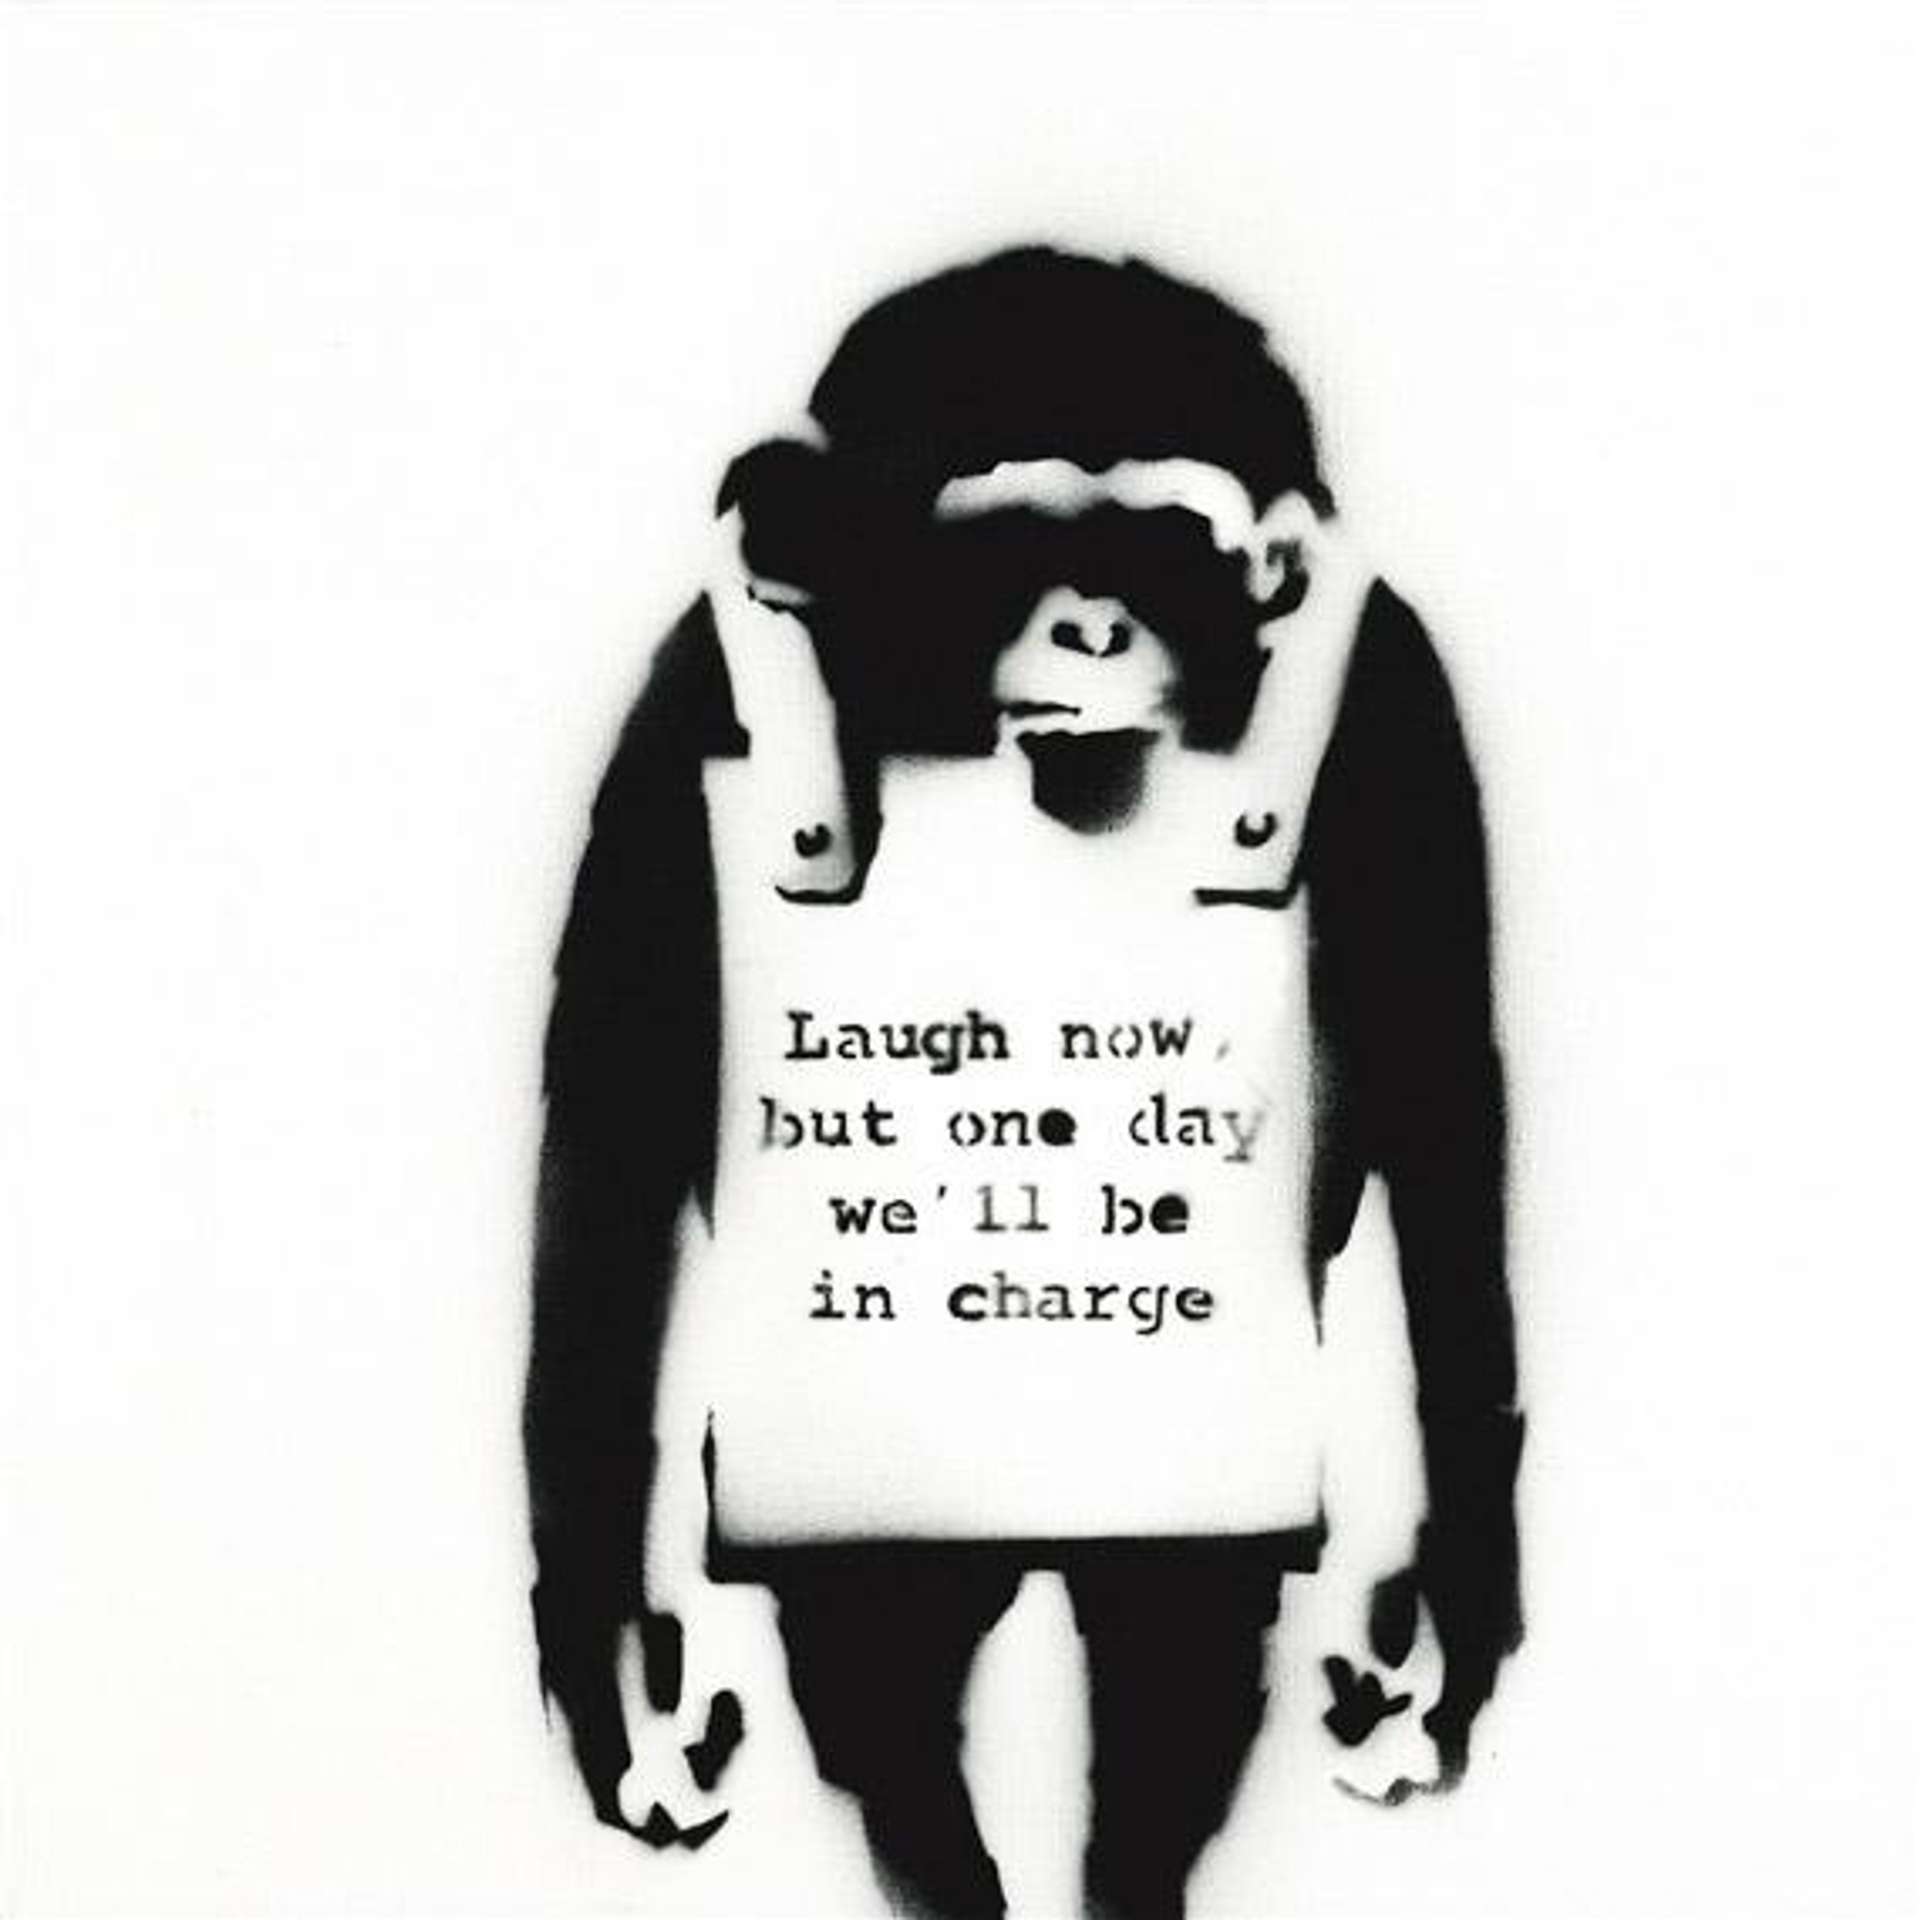 A black and white graffiti stencil image by Banksy depicting a chimpanzee with a sandwich board reading: “Laugh Now But One Day We'll Be In Charge”.